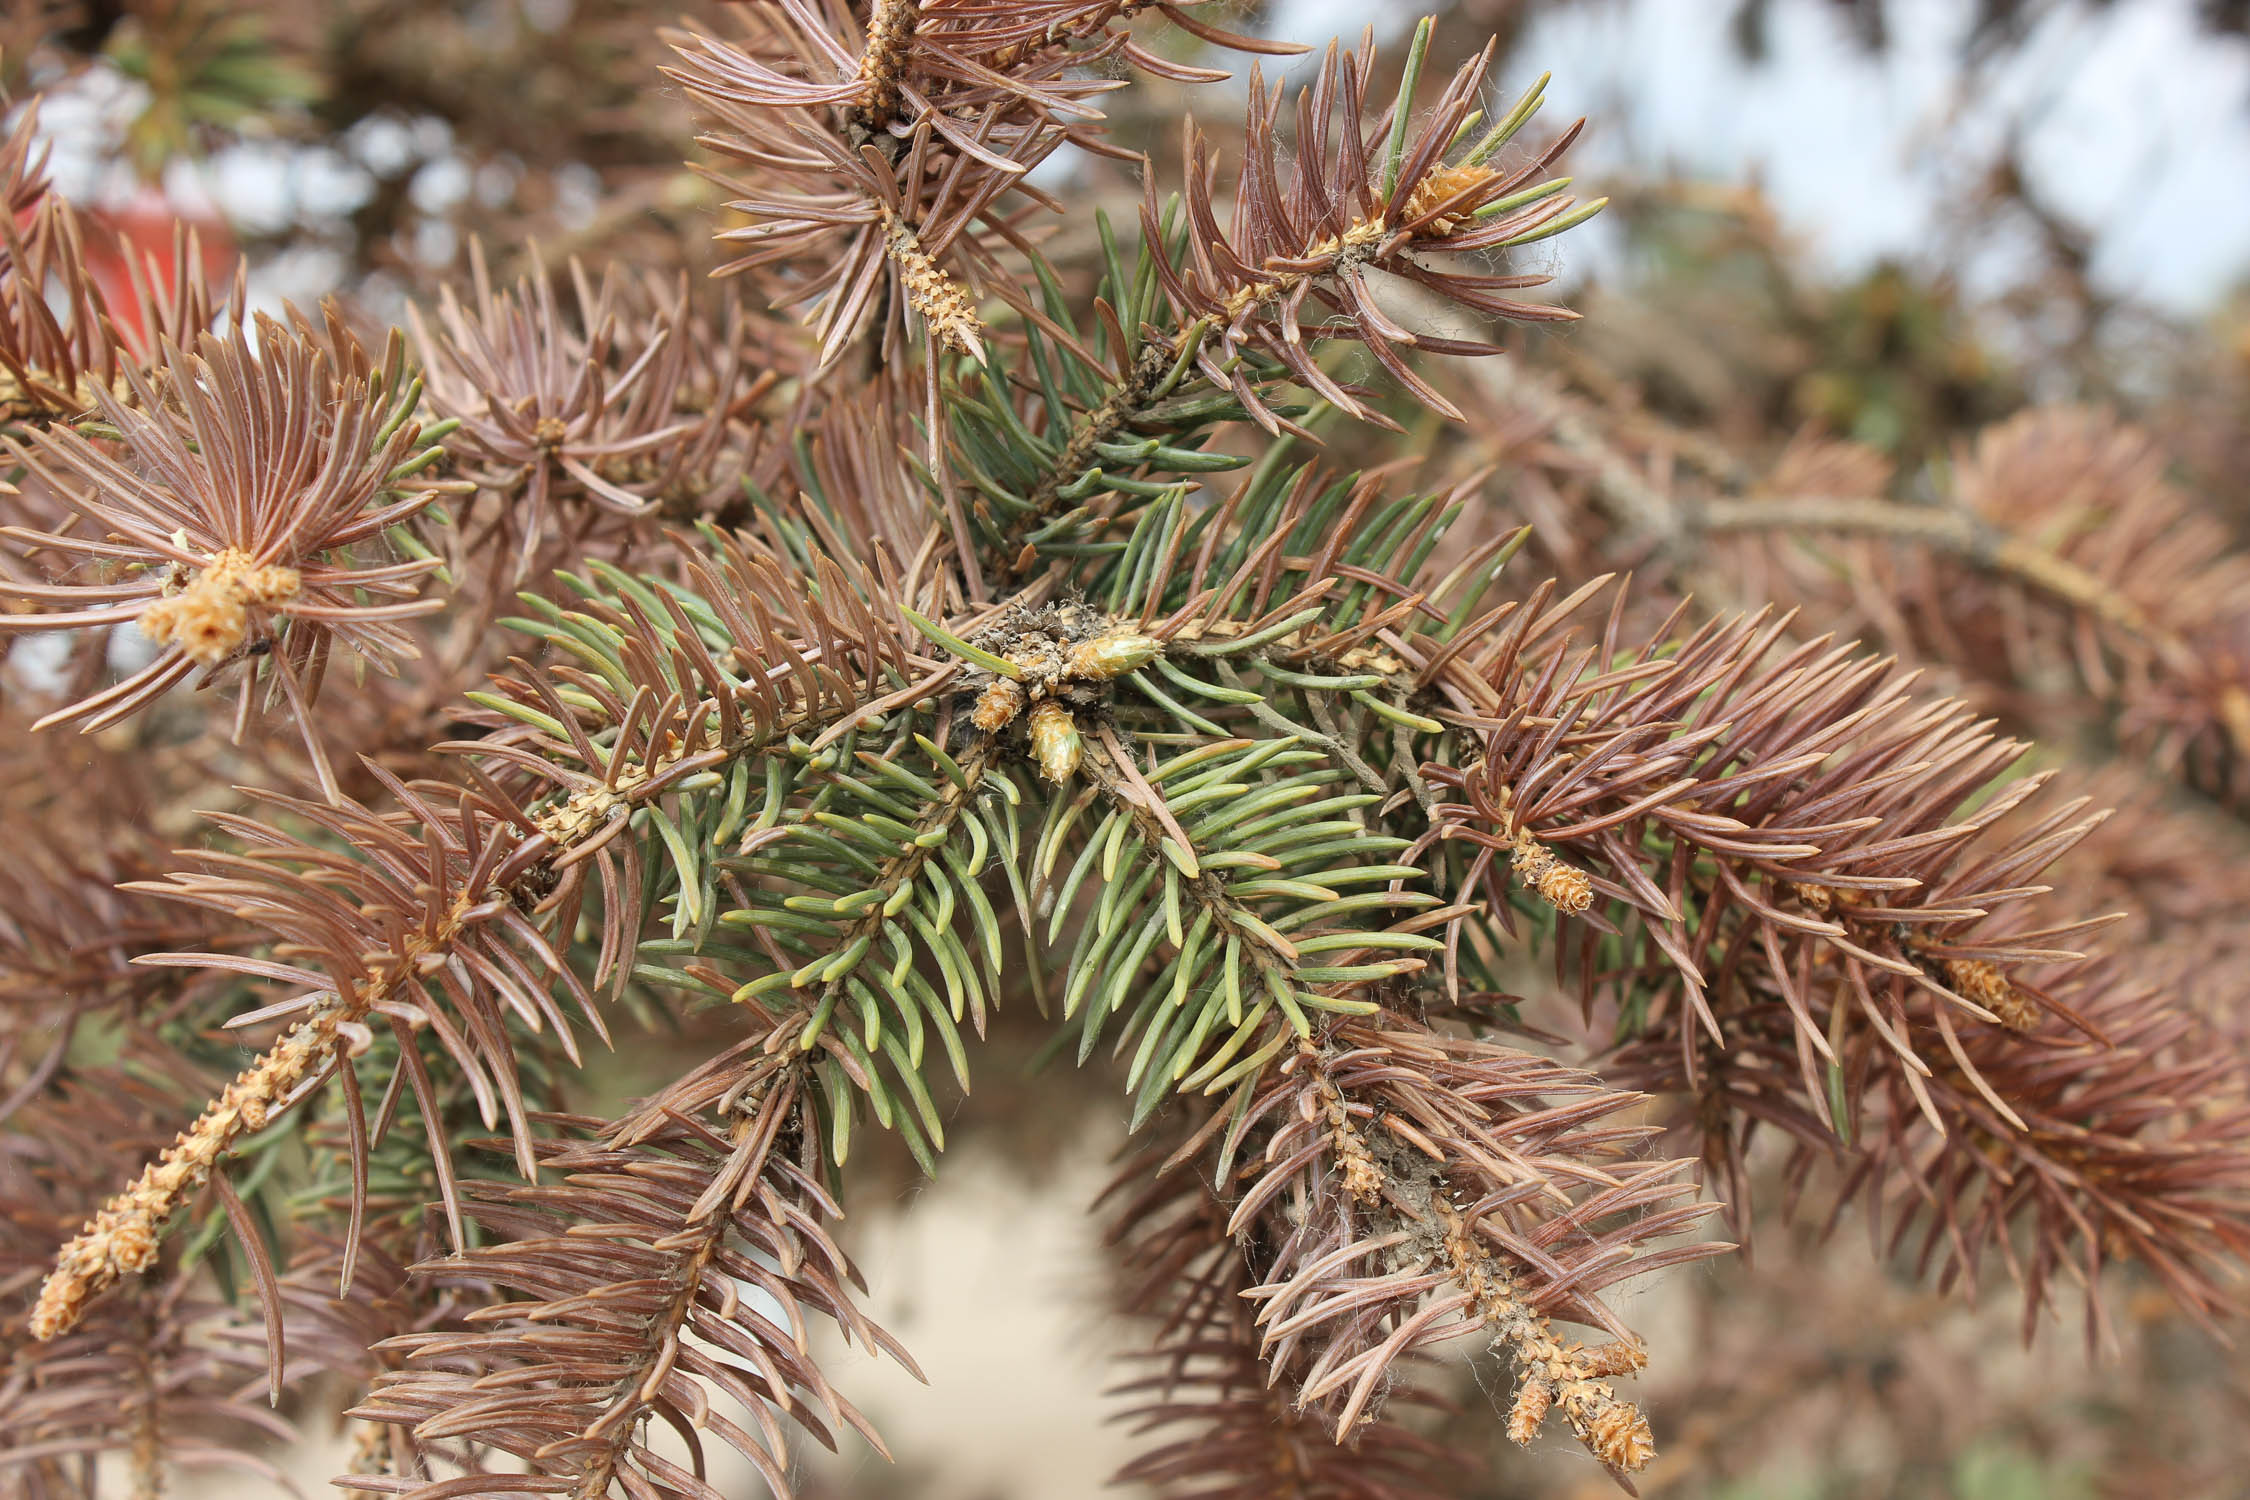 Why is my evergreen turning brown and losing needles? - Gardening at USask  - College of Agriculture and Bioresources